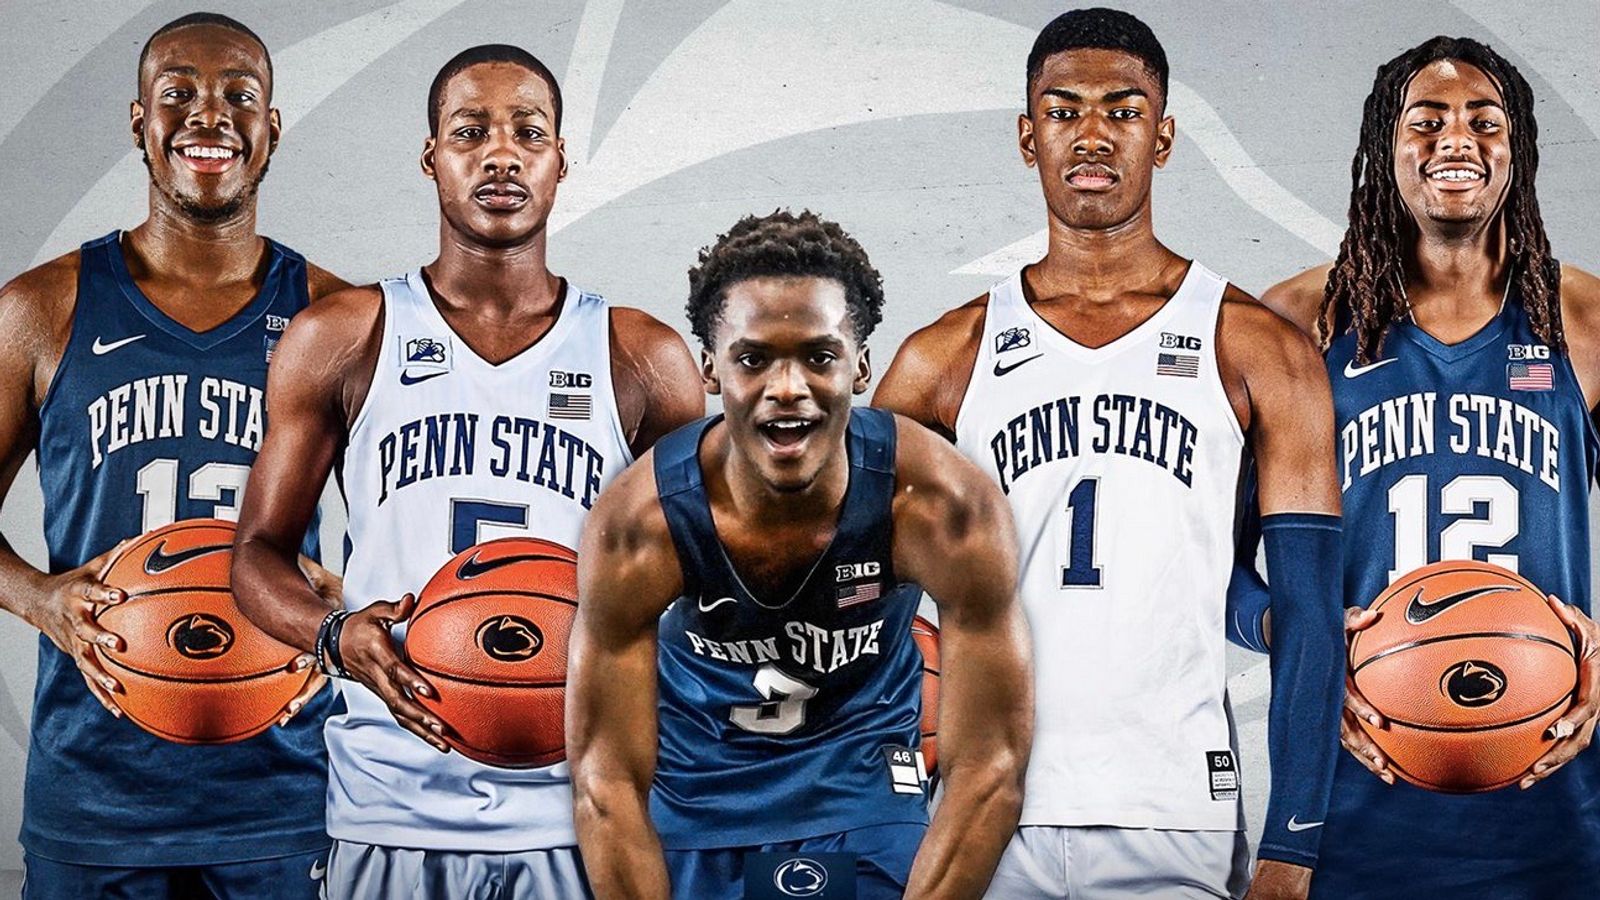 What Should Penn State Hoops' New Uniforms Look Like?